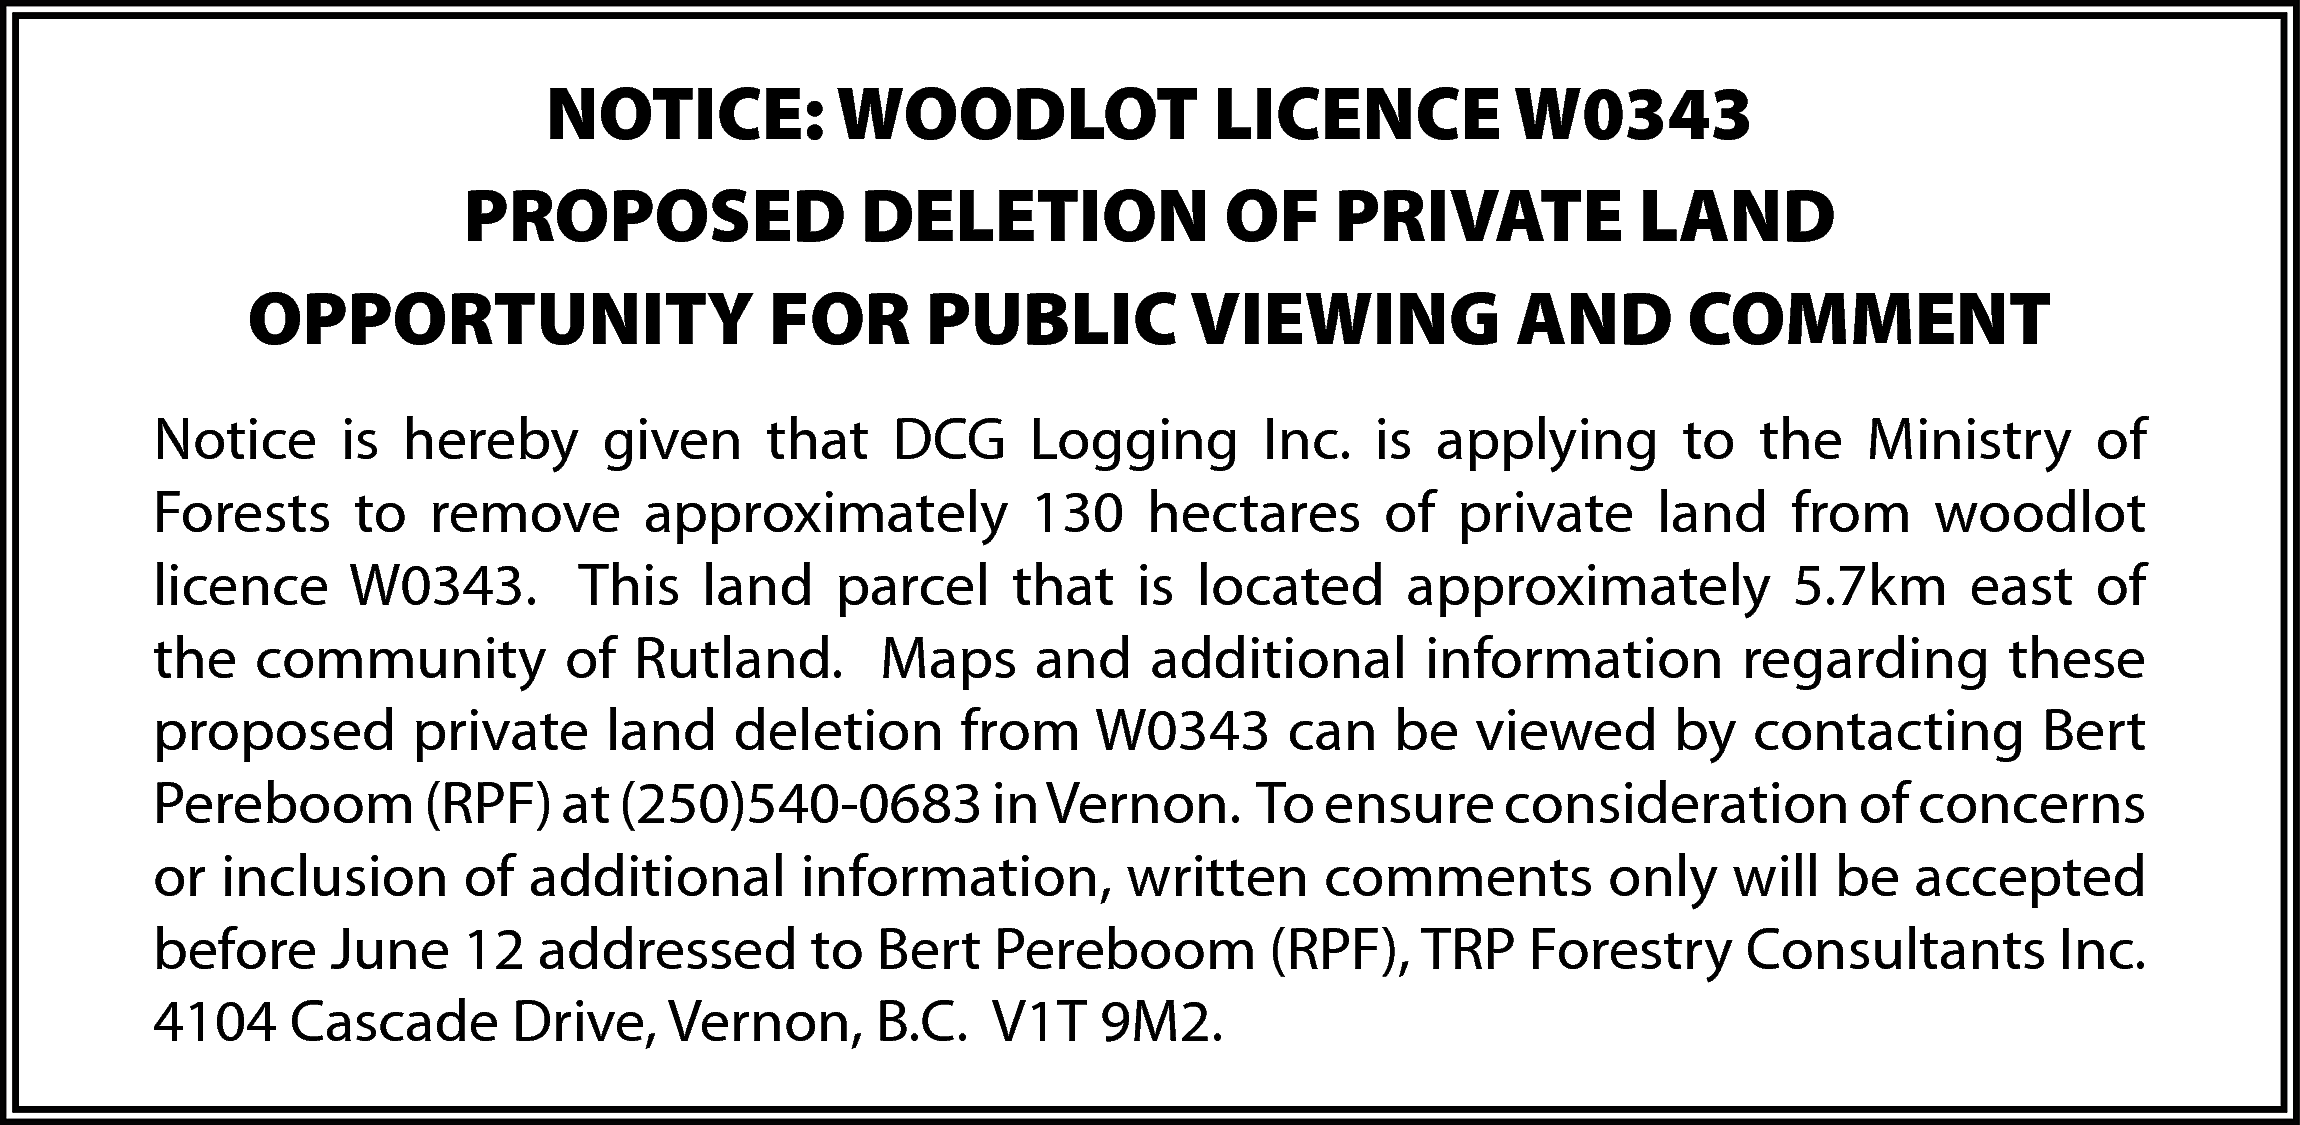 NOTICE: WOODLOT LICENCE W0343 <br>PROPOSED  NOTICE: WOODLOT LICENCE W0343  PROPOSED DELETION OF PRIVATE LAND  OPPORTUNITY FOR PUBLIC VIEWING AND COMMENT  Notice is hereby given that DCG Logging Inc. is applying to the Ministry of  Forests to remove approximately 130 hectares of private land from woodlot  licence W0343. This land parcel that is located approximately 5.7km east of  the community of Rutland. Maps and additional information regarding these  proposed private land deletion from W0343 can be viewed by contacting Bert  Pereboom (RPF) at (250)540-0683 in Vernon. To ensure consideration of concerns  or inclusion of additional information, written comments only will be accepted  before June 12 addressed to Bert Pereboom (RPF), TRP Forestry Consultants Inc.  4104 Cascade Drive, Vernon, B.C. V1T 9M2.    